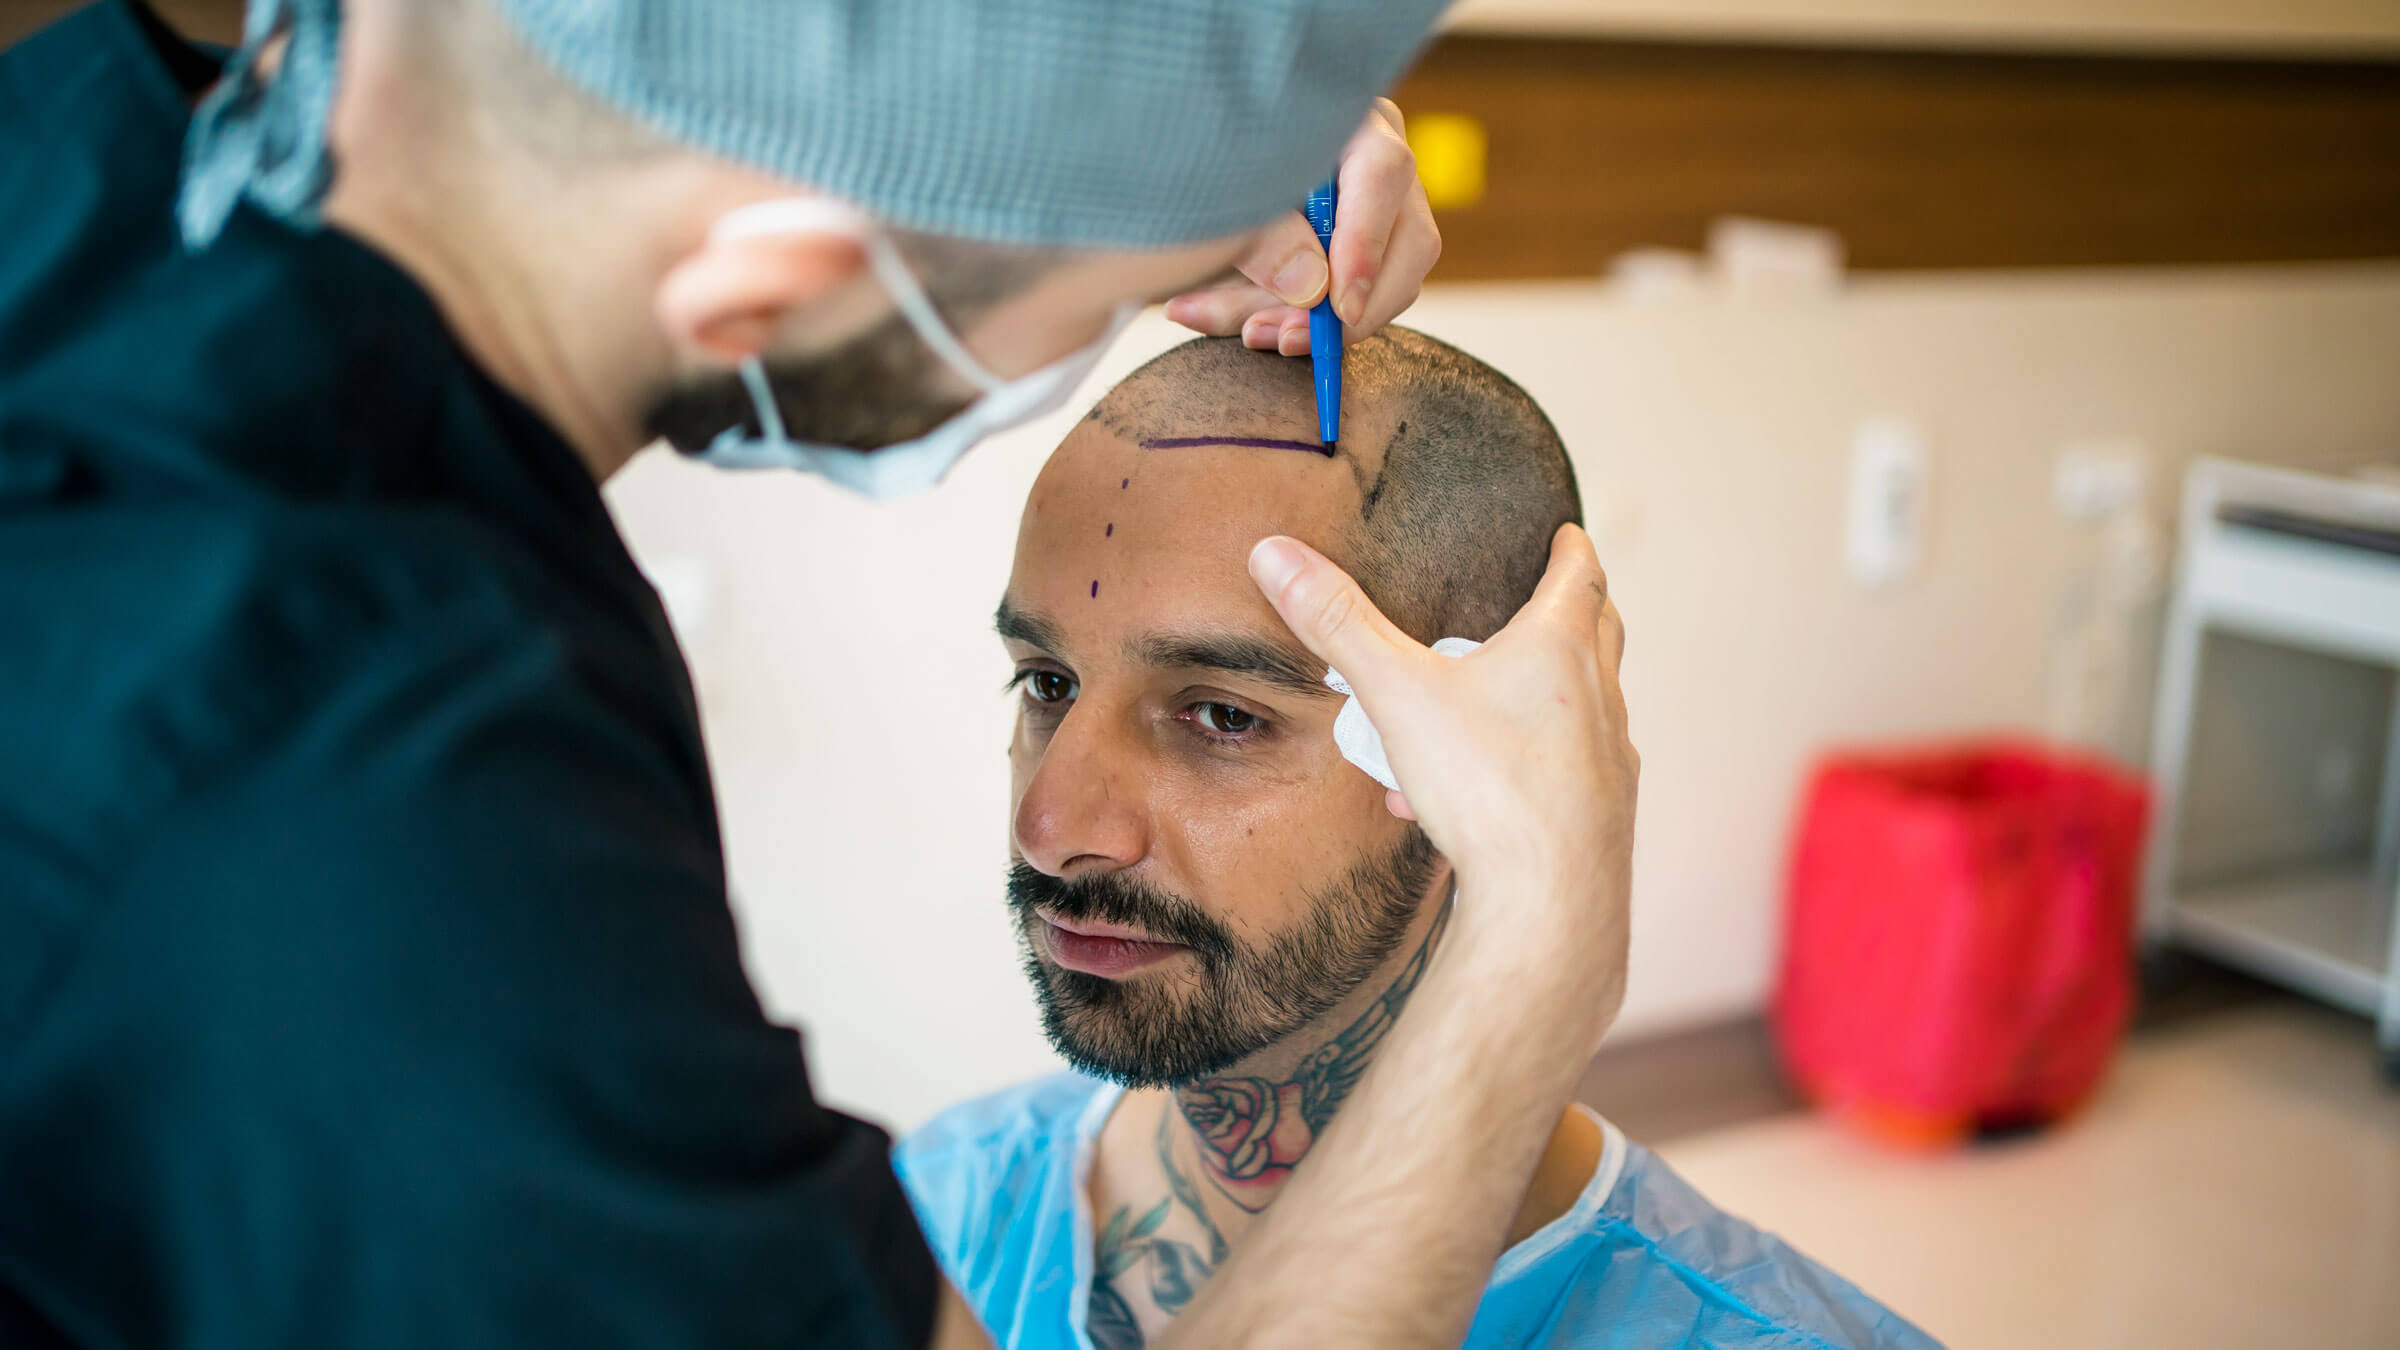 Is Hair Transplant Costly? And What Happens After Hair Transplant?